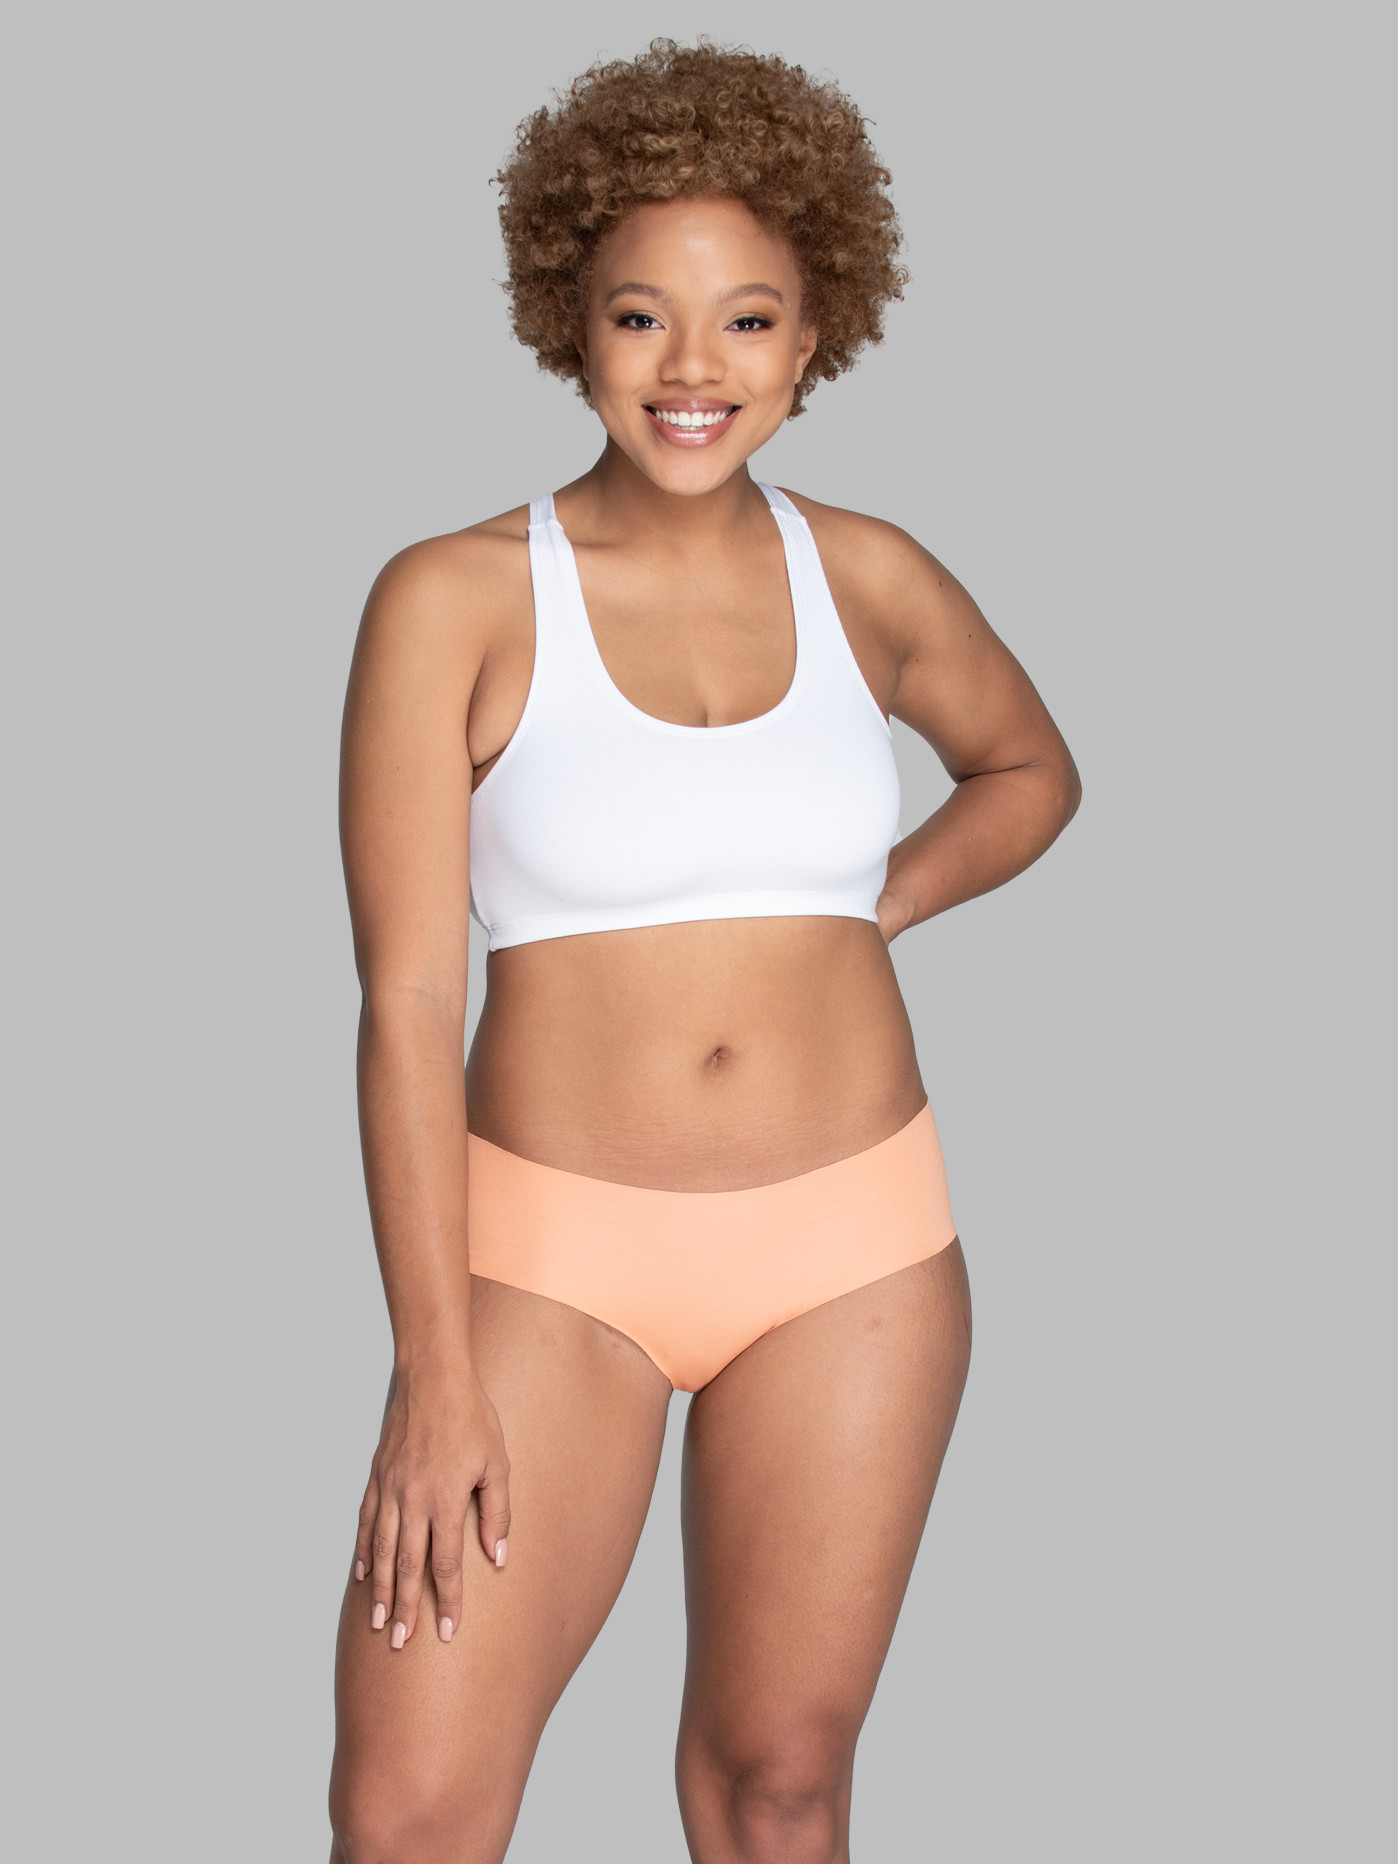  Fruit Of The Loom Womens No Show Seamless Underwear, Amazing  Stretch & No Panty Lines, Available In Plus Size, Pima Cotton Blend-Cheeky  Bikini-3 Pack-Nude/Silver/Black